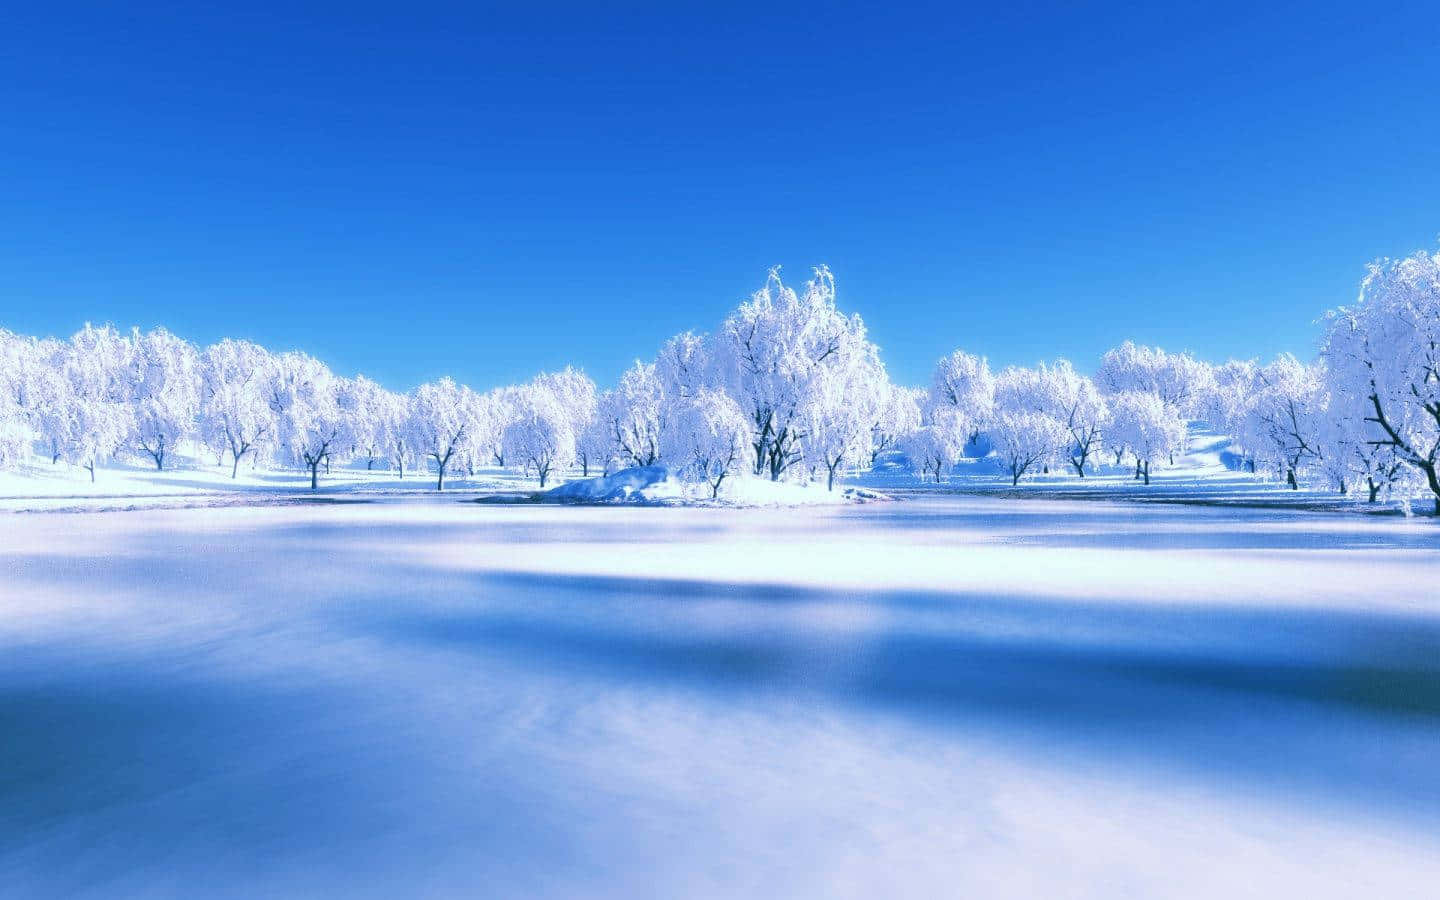 A Winter Scene With Trees And A Lake